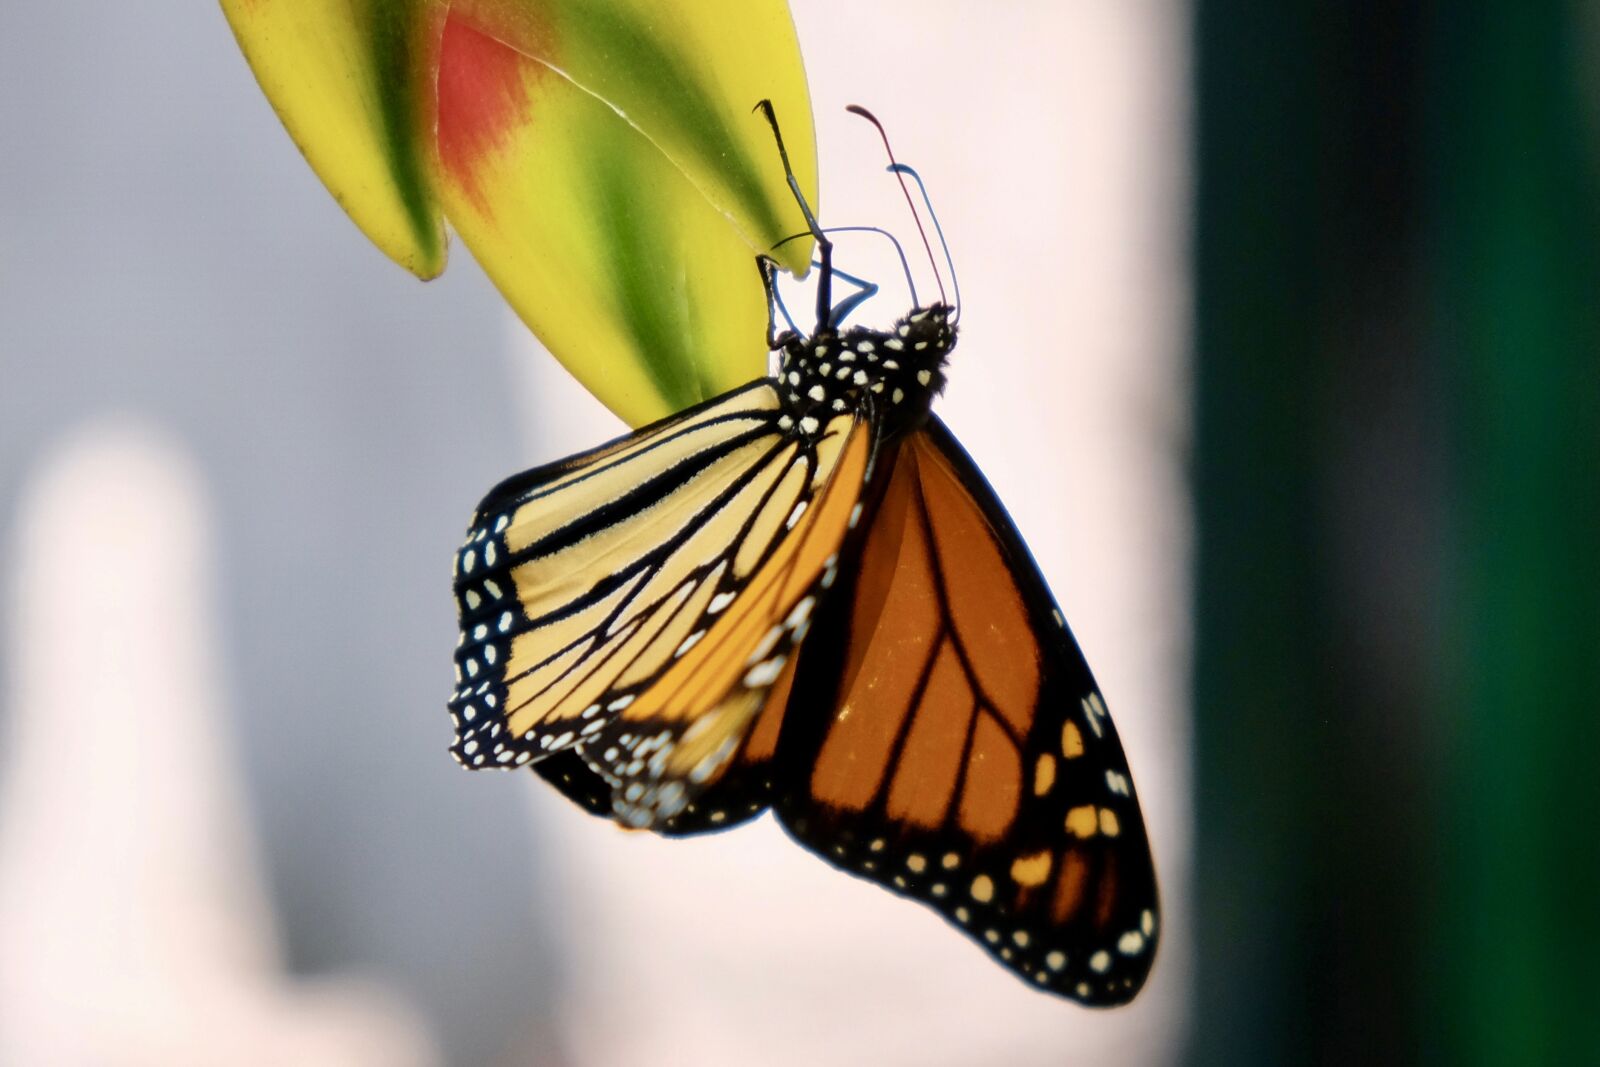 Fujifilm X-T20 sample photo. Monarch butterfly, australia, insect photography